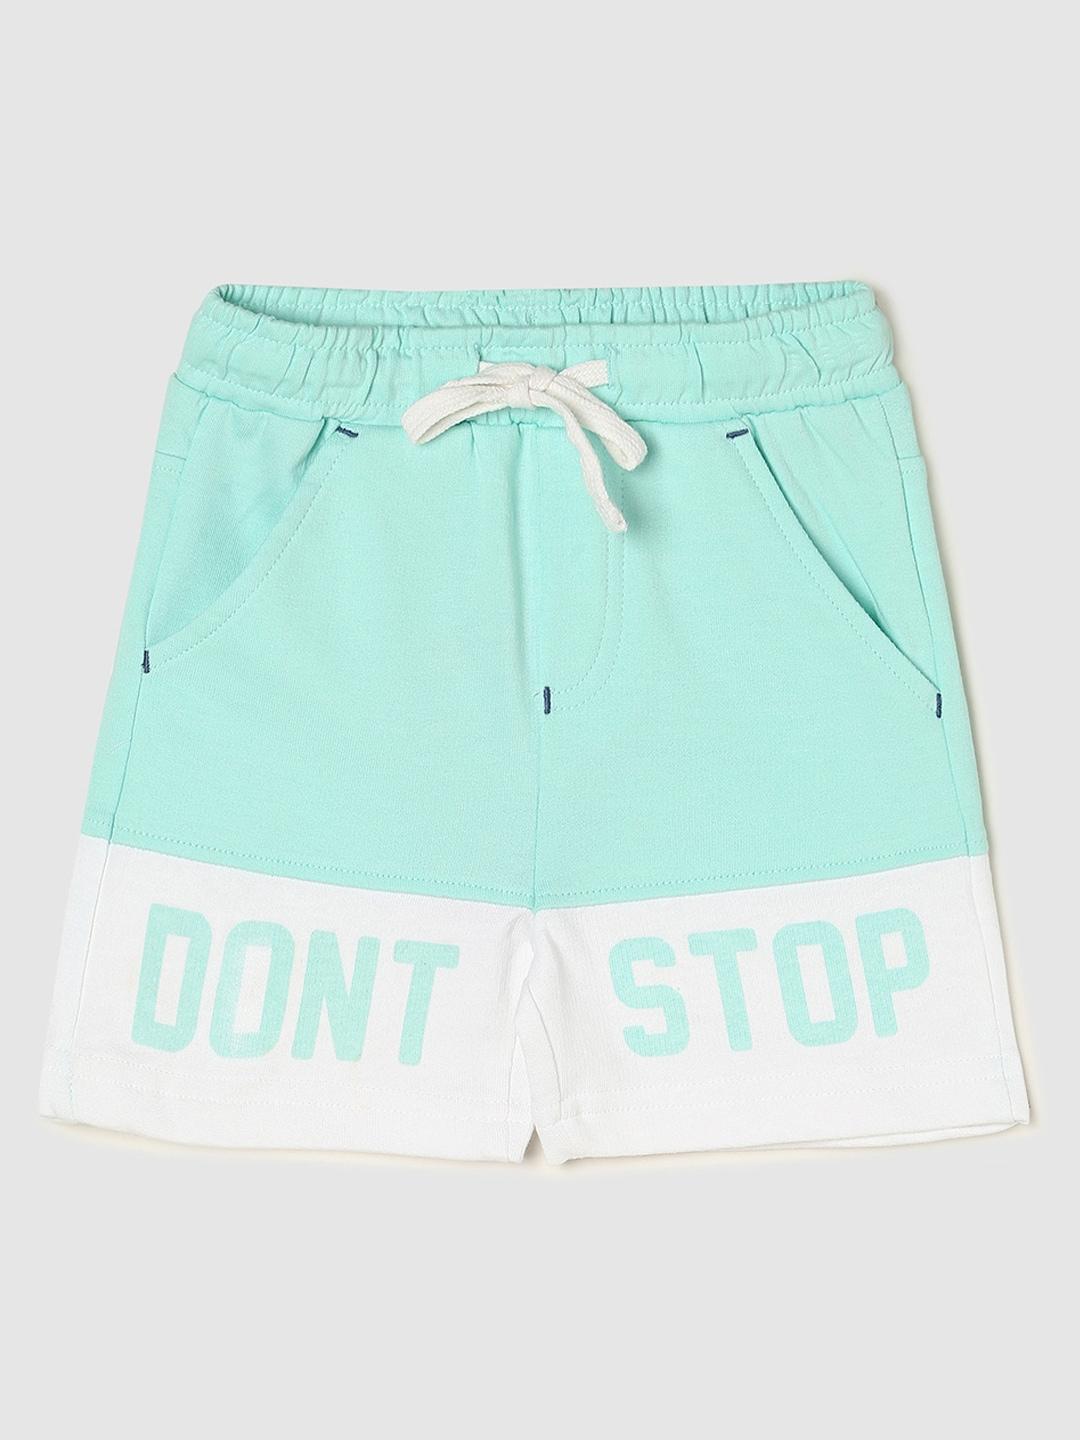 max boys typography printed mid rise pure cotton shorts